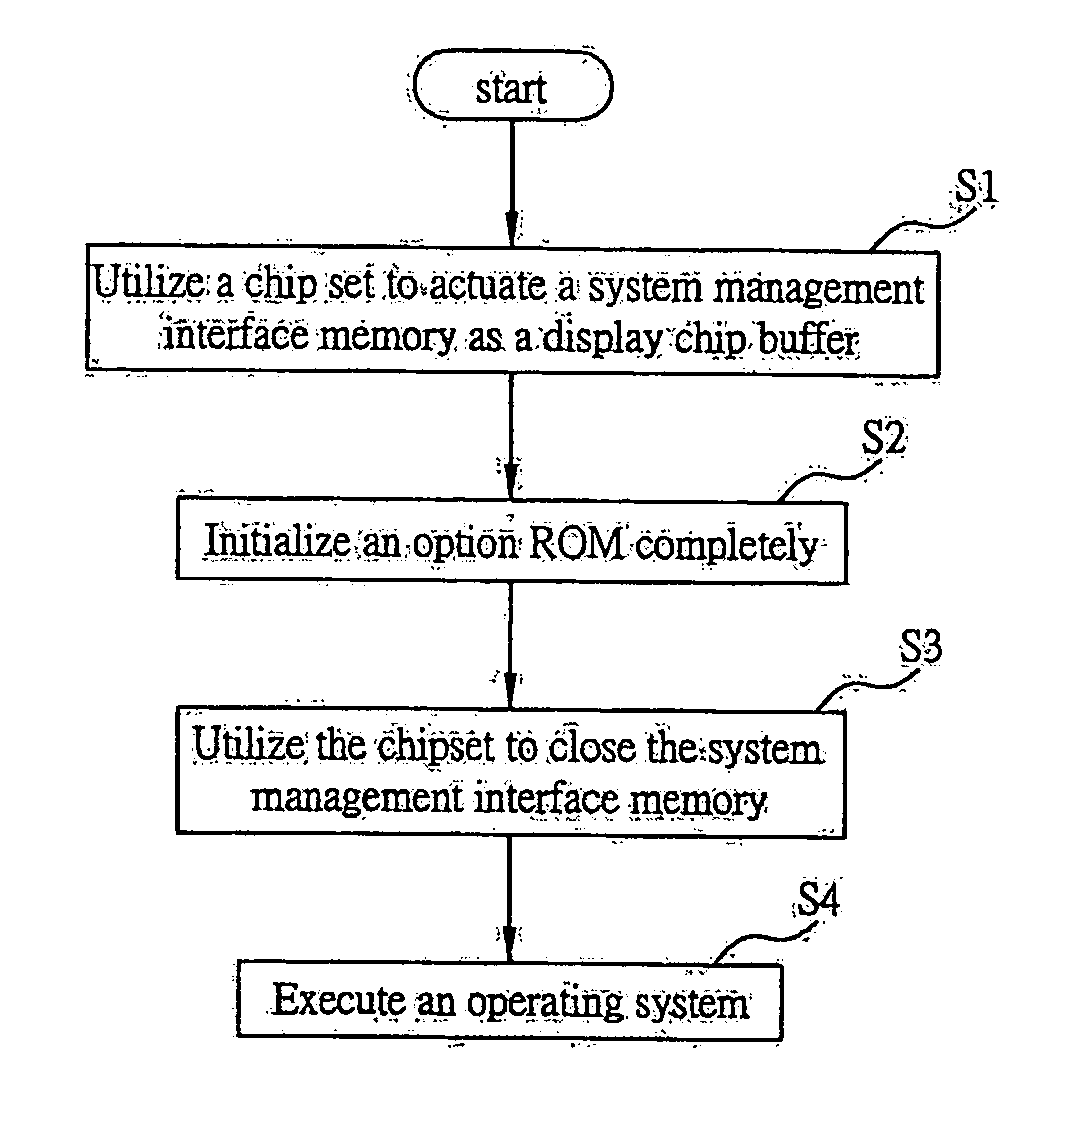 Initialization picture displaying method